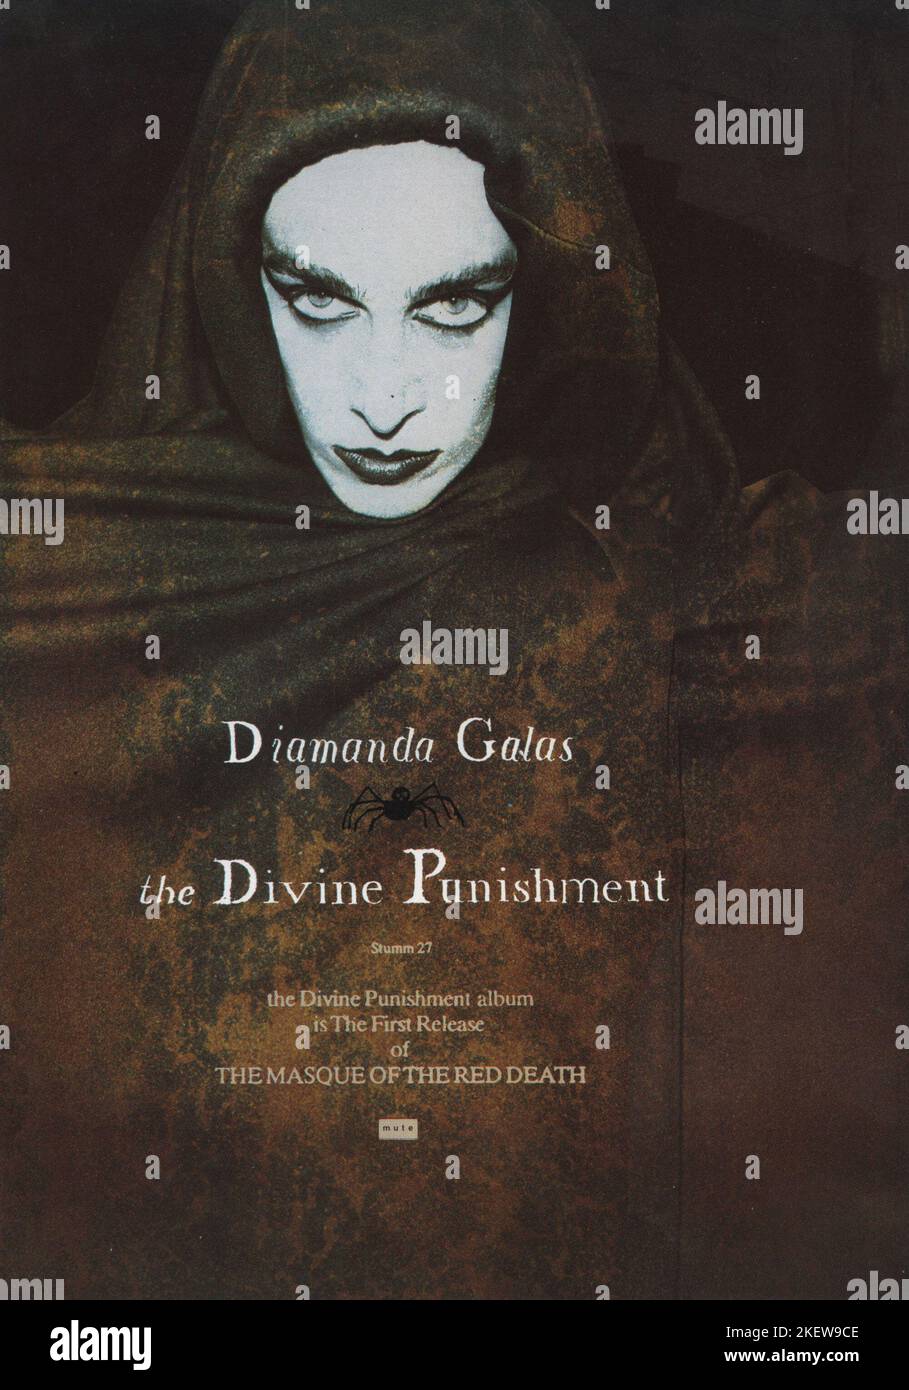 Diamanda Galas. The Divine Punishment. Mute Stumm 27 promotional flyer.  The Divine Punishment was the third album by American avant-garde artist Galás, released on June 30, 1986 by record label Mute. This is an A5 leaflet produced by Mute to promote the release in 1986. Stock Photo